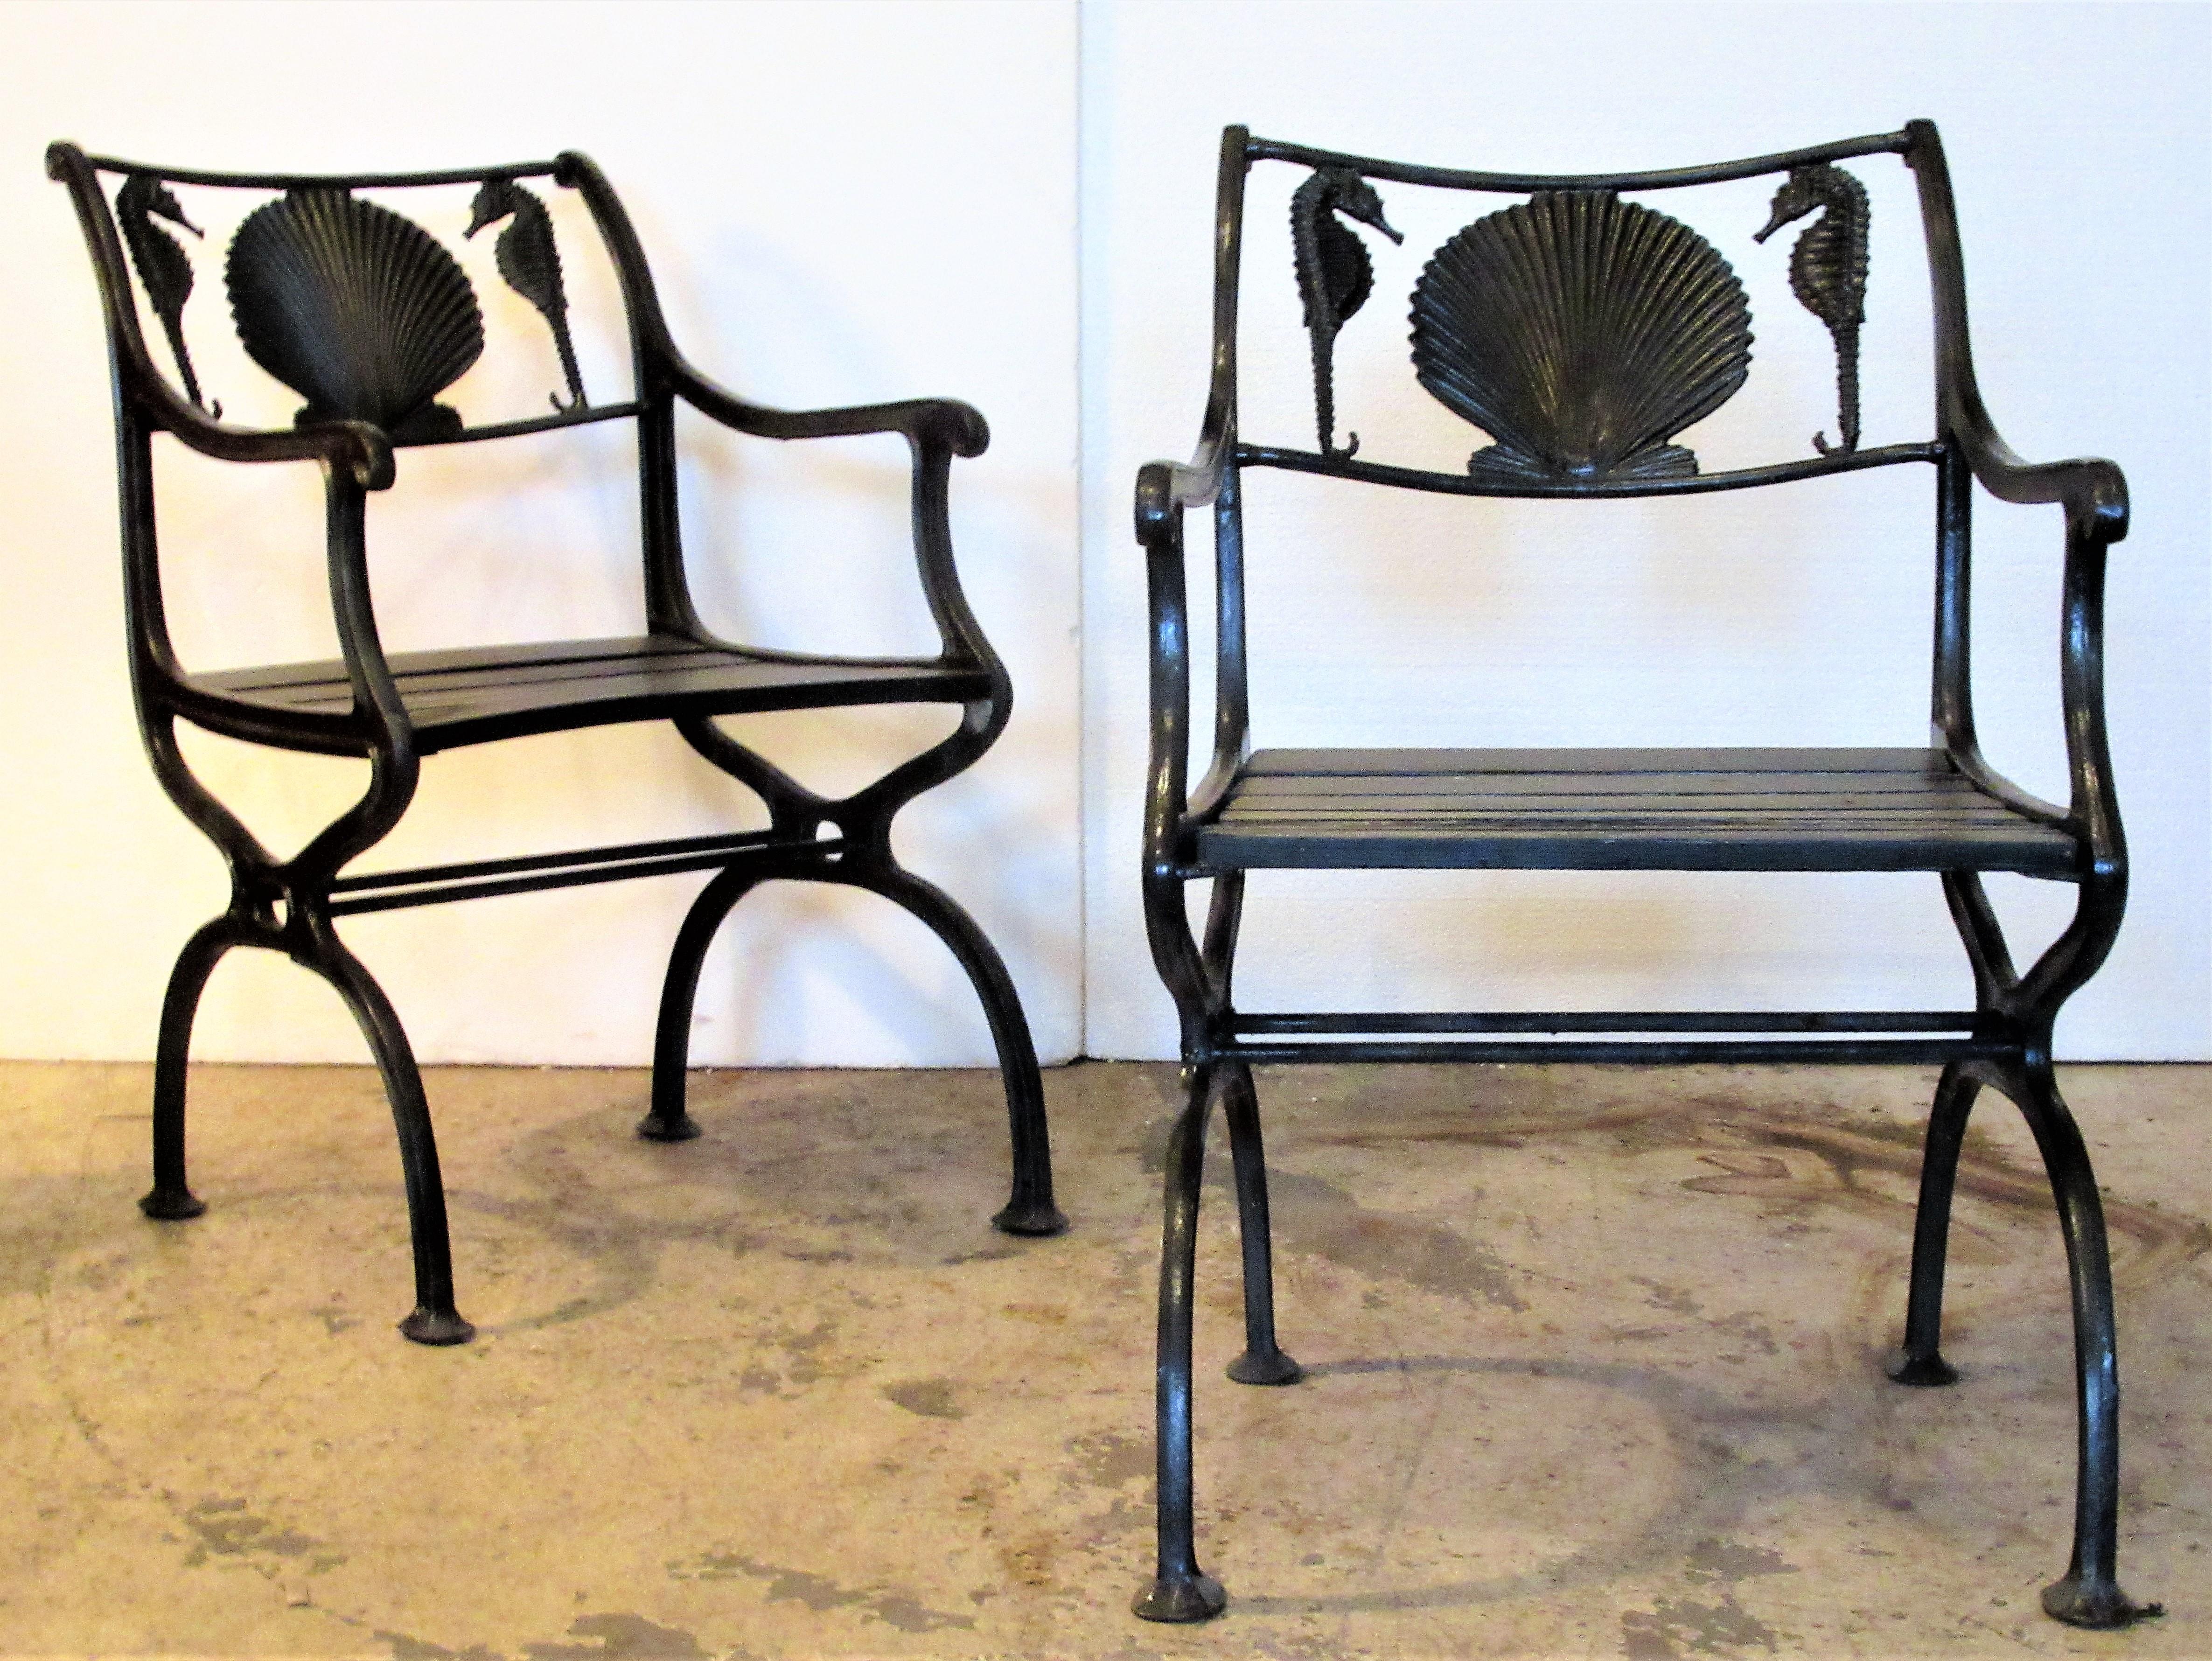 Pair of antique American black painted cast iron garden chairs with curved arms, wood plank seats and finely detailed sea horse and scallop shell design at top rails. They are stamped in iron at upper side seat rail Marcy Foundry - NY, NY patent